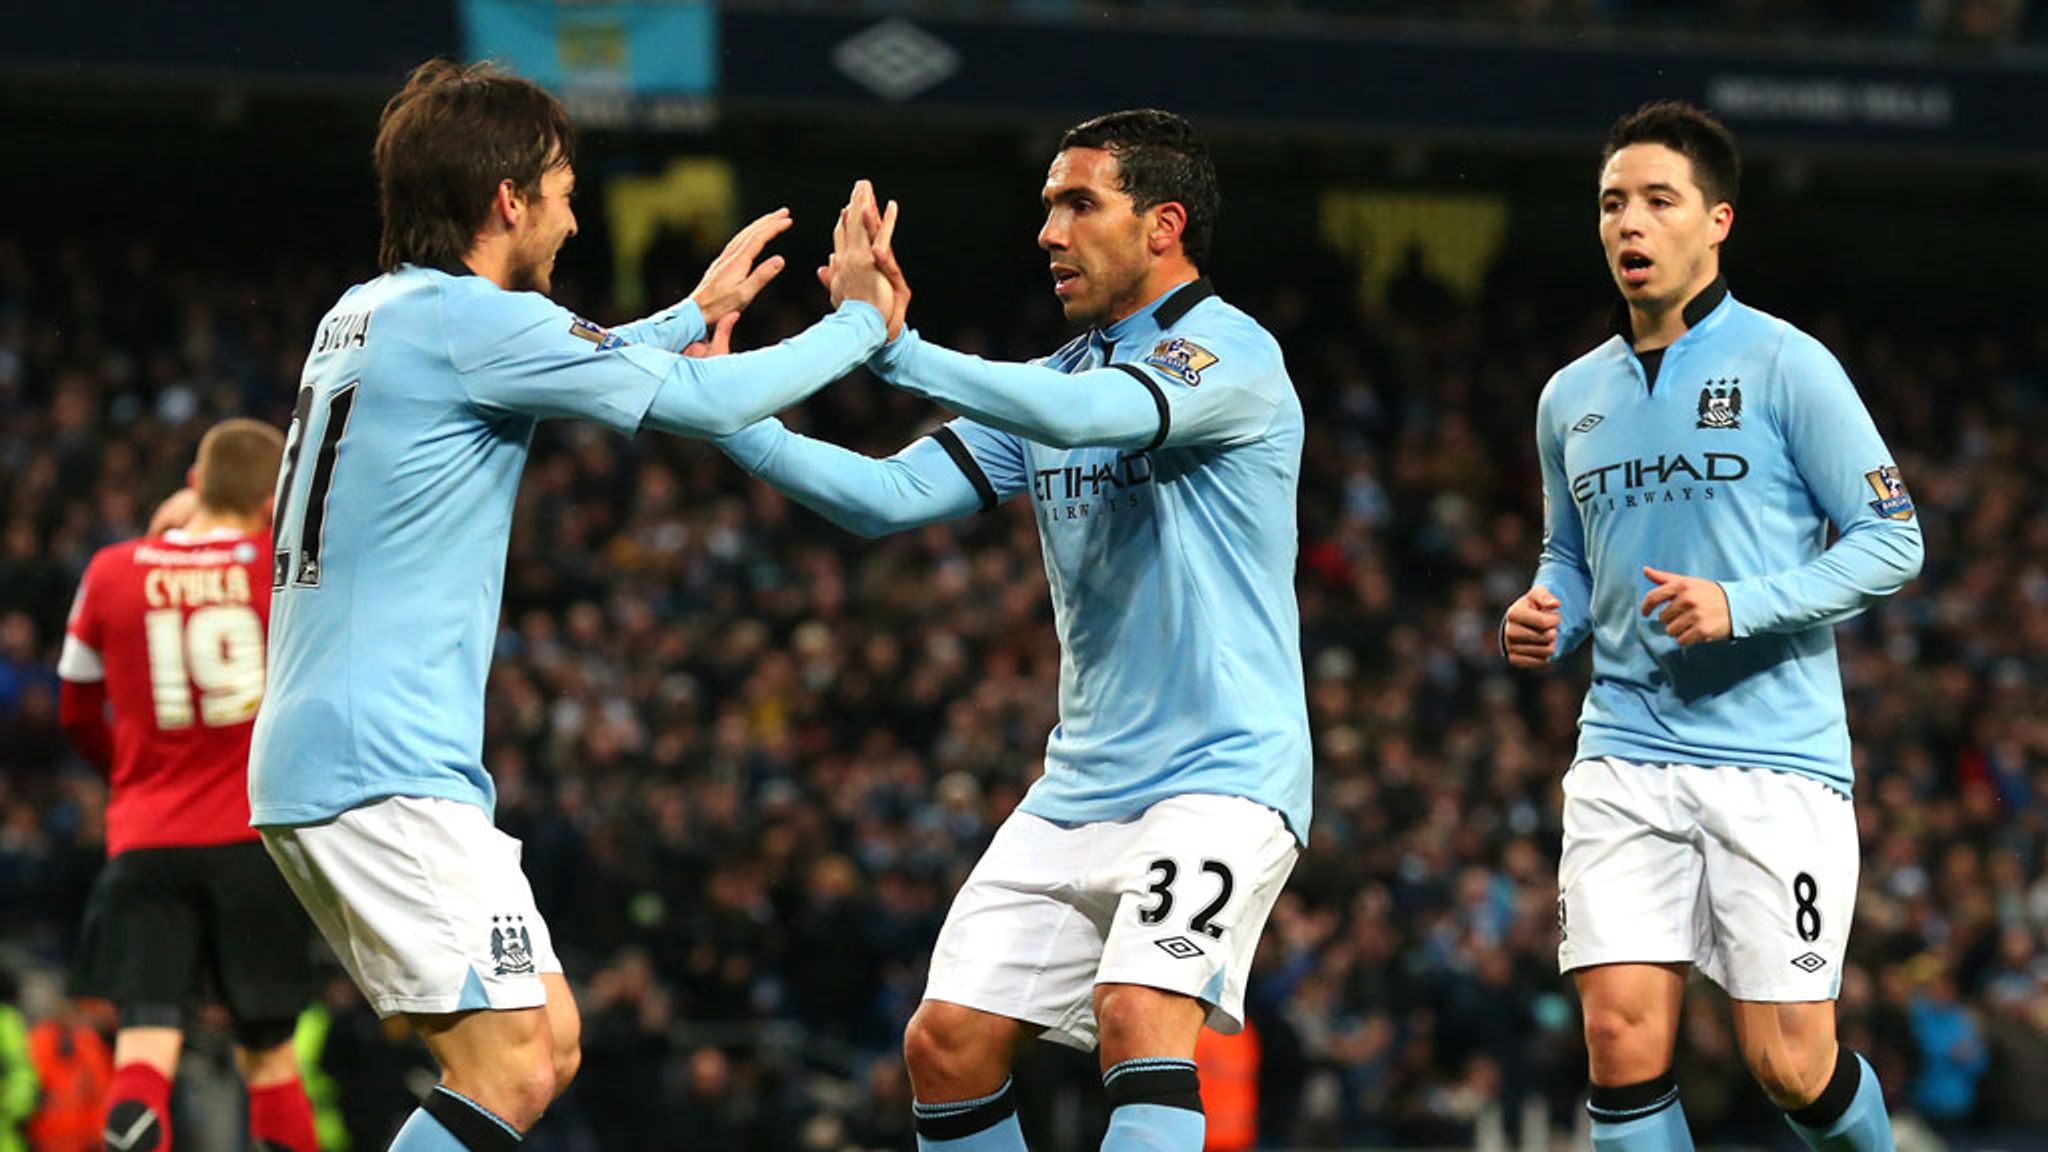 FA Cup: Carlos Tevez hat-trick leads Manchester City past Barnsley | Football News | Sky Sports